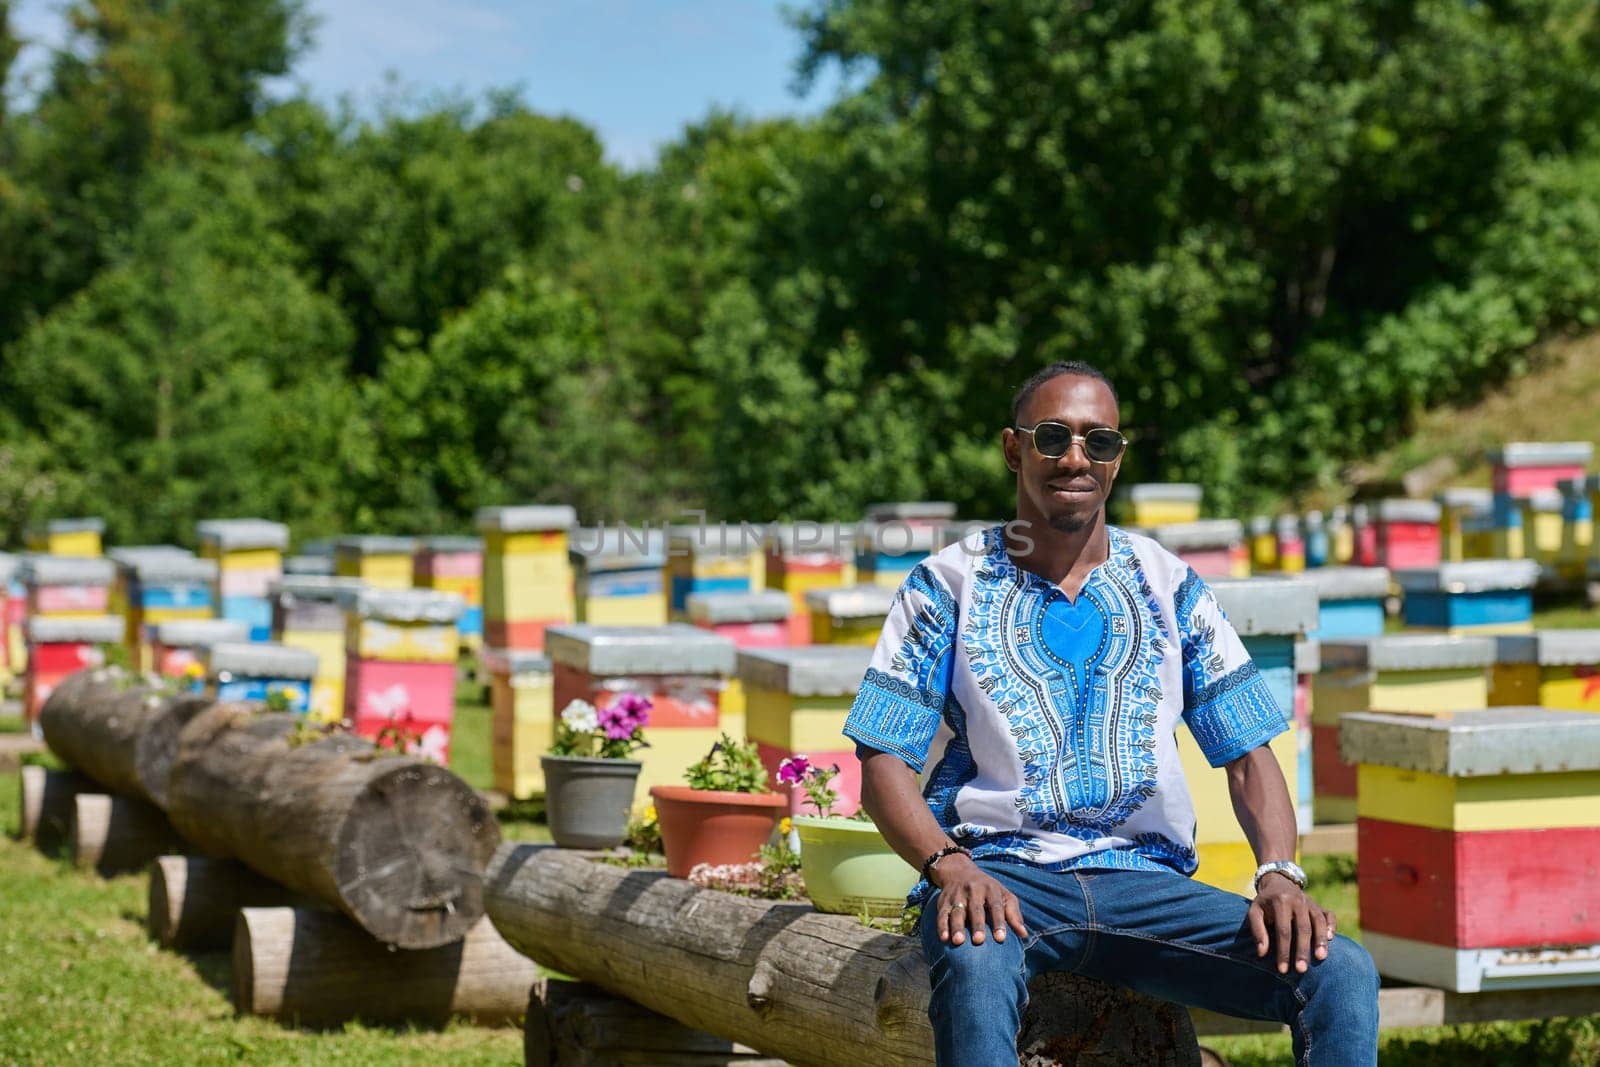 African American teenager clad in traditional Sudanese attire explores small beekeeping businesses amidst the beauty of nature